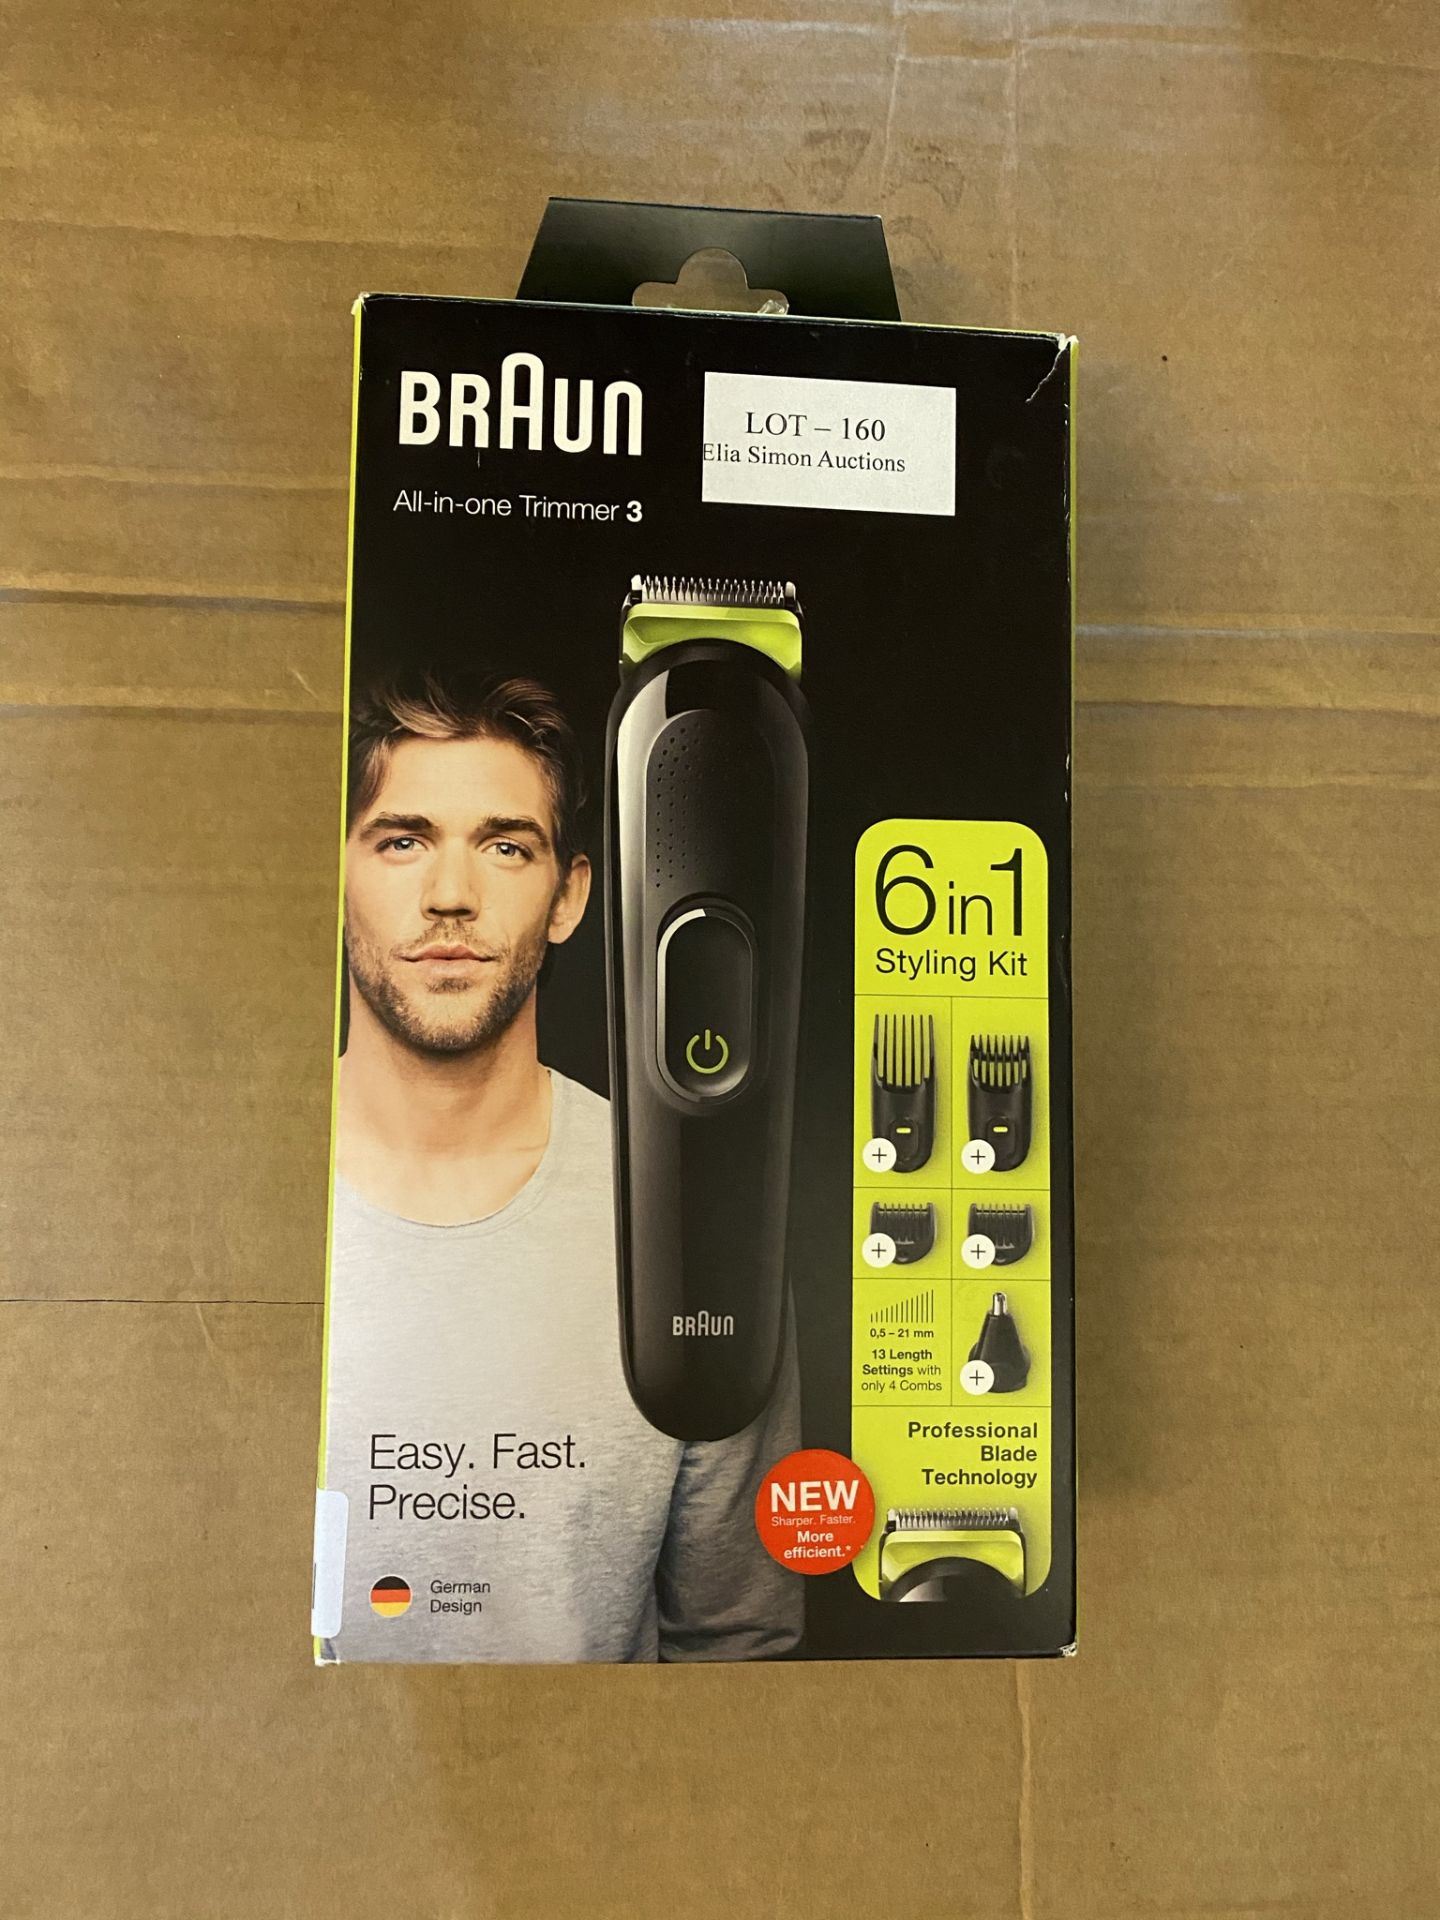 BRAUN ALL-IN-ONE TRIMMER 3 6 IN 1 STYLING KIT EASY FAST PRECISE